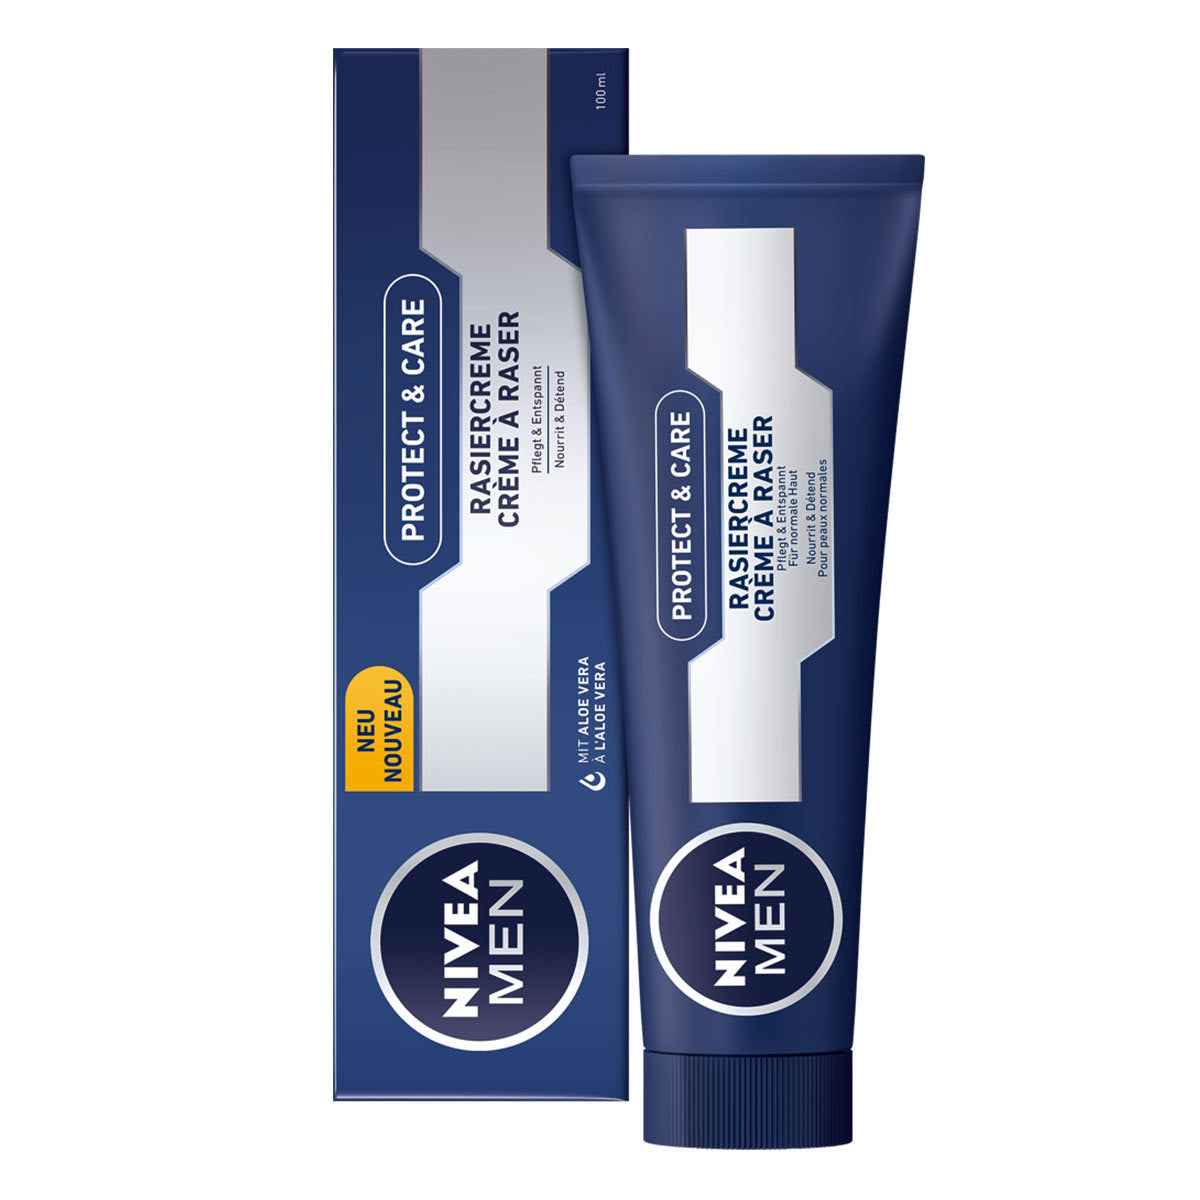 Primary image of Protect + Care Shaving Cream